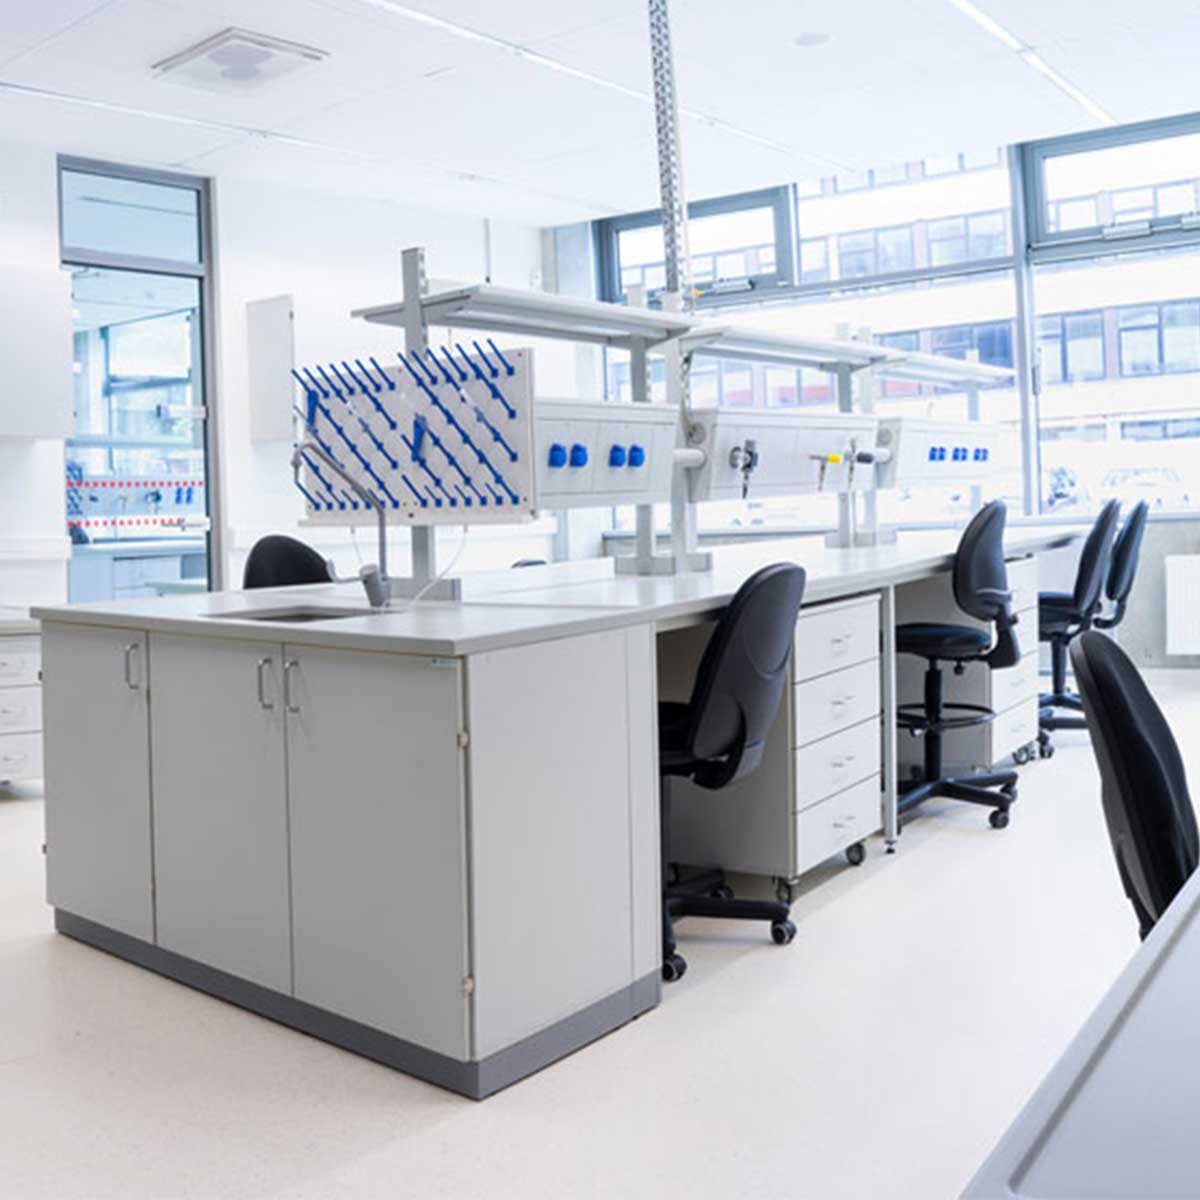 Chemistry Lab Furniture Manufacturers, Suppliers in Rohini Sector 27